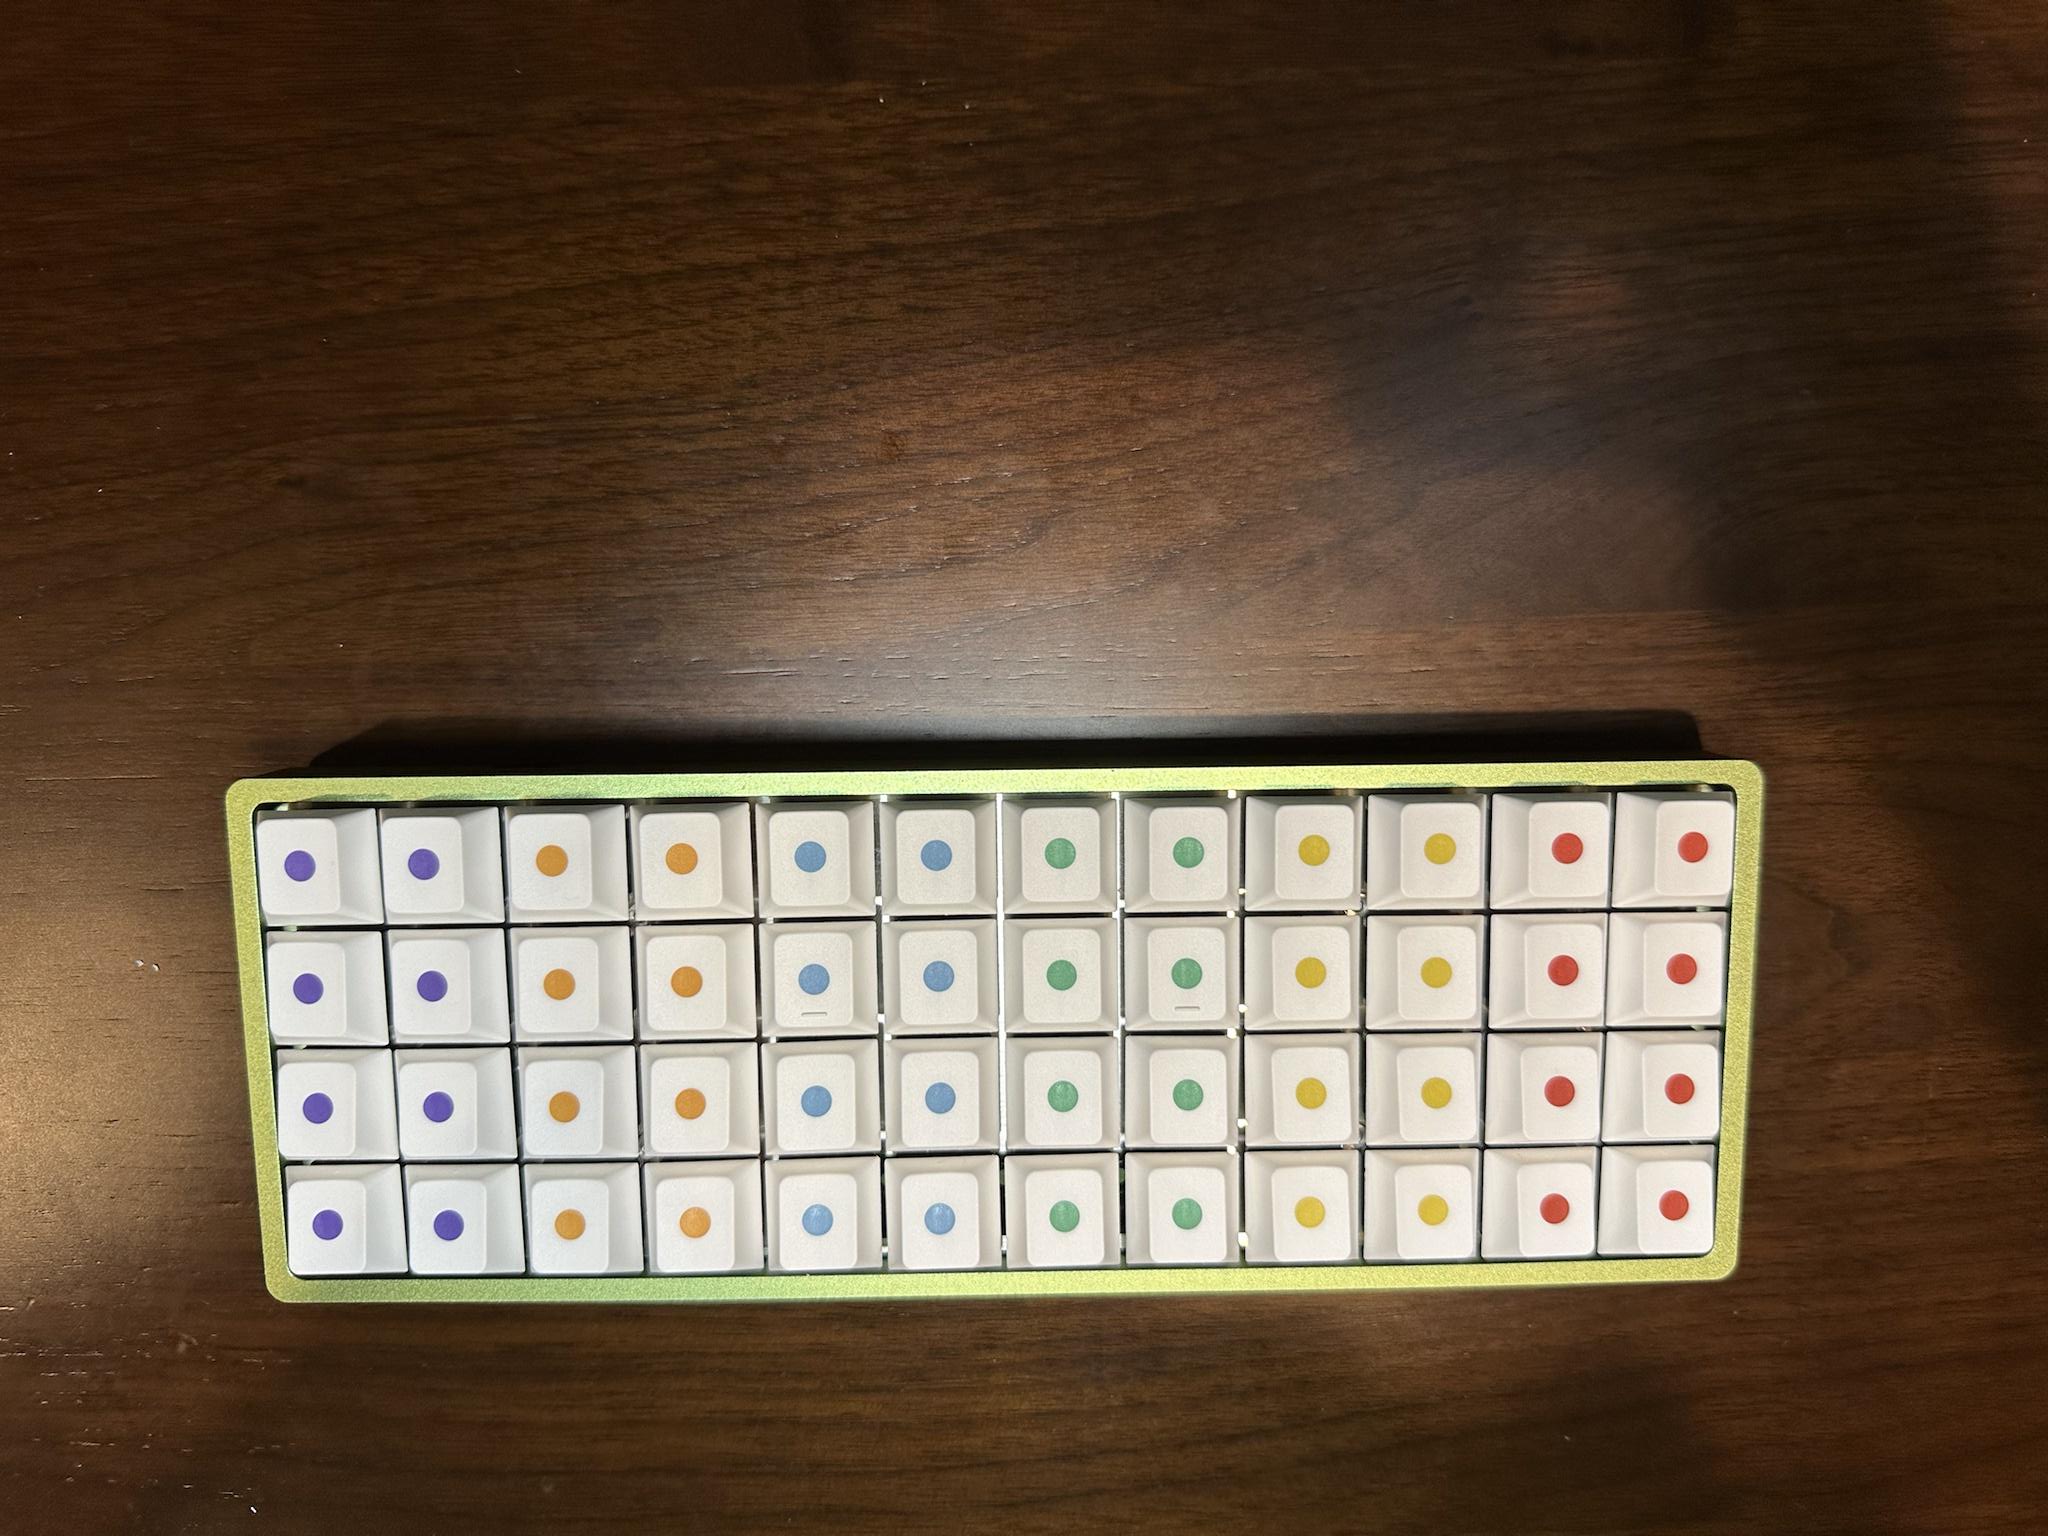 Planck with GMK dots